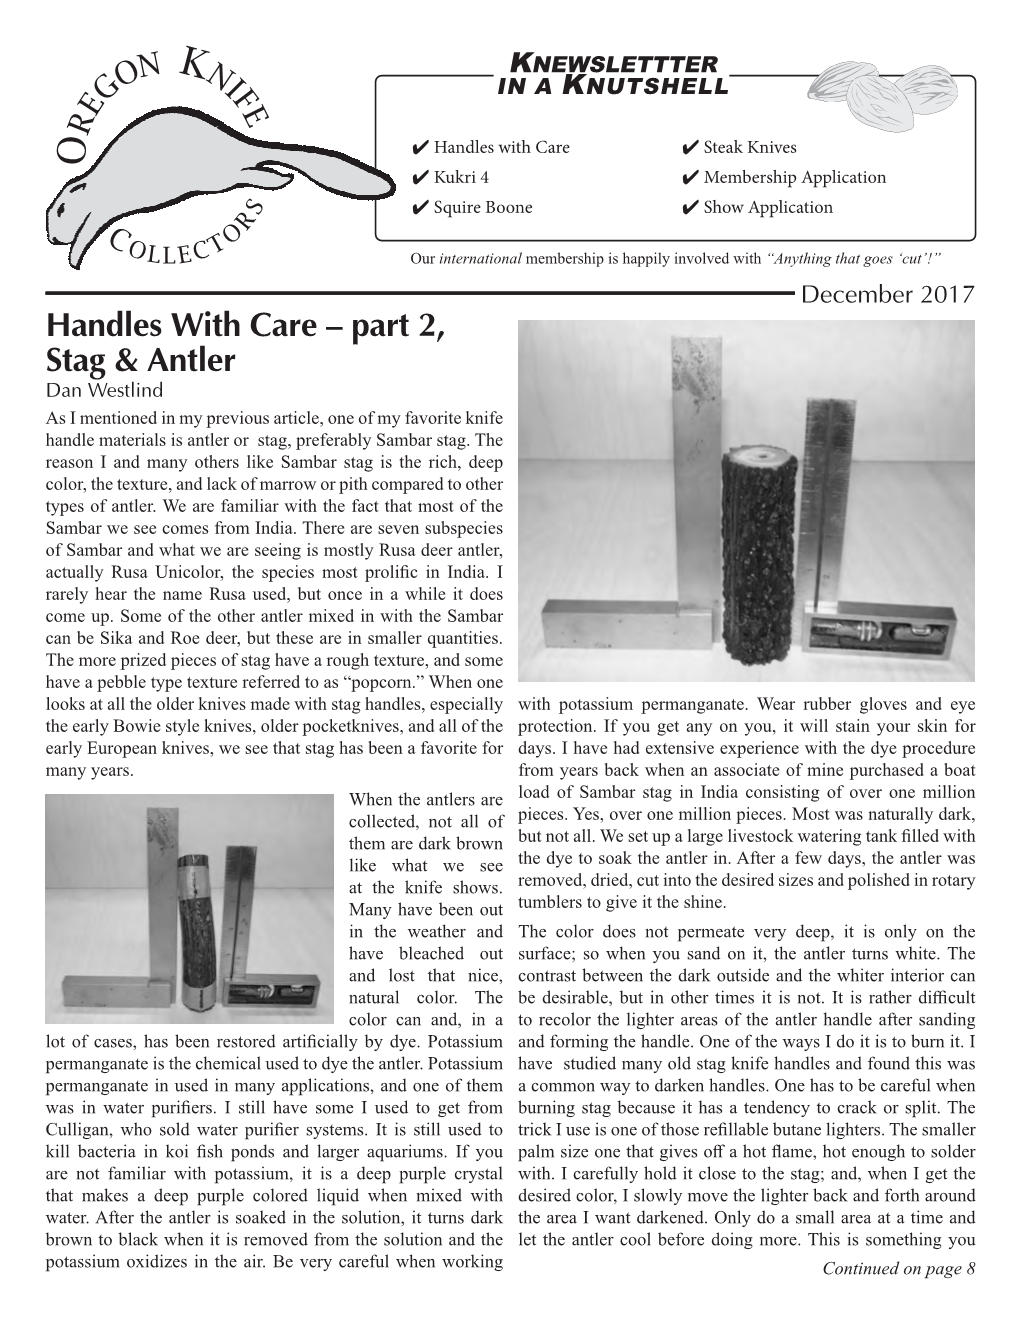 Handles with Care – Part 2, Stag & Antler